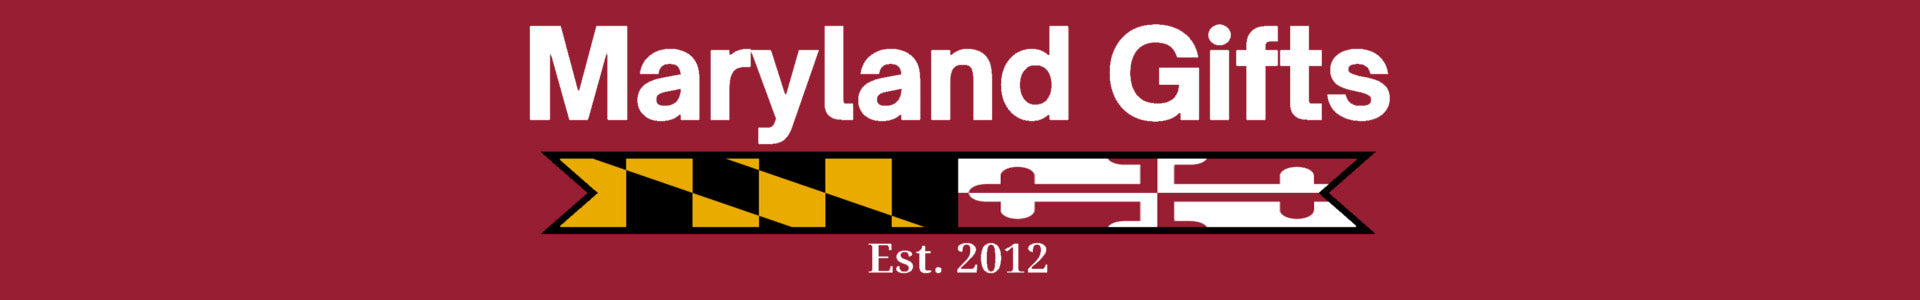 Forever Collectibles | Shop Maryland-Gifts.com